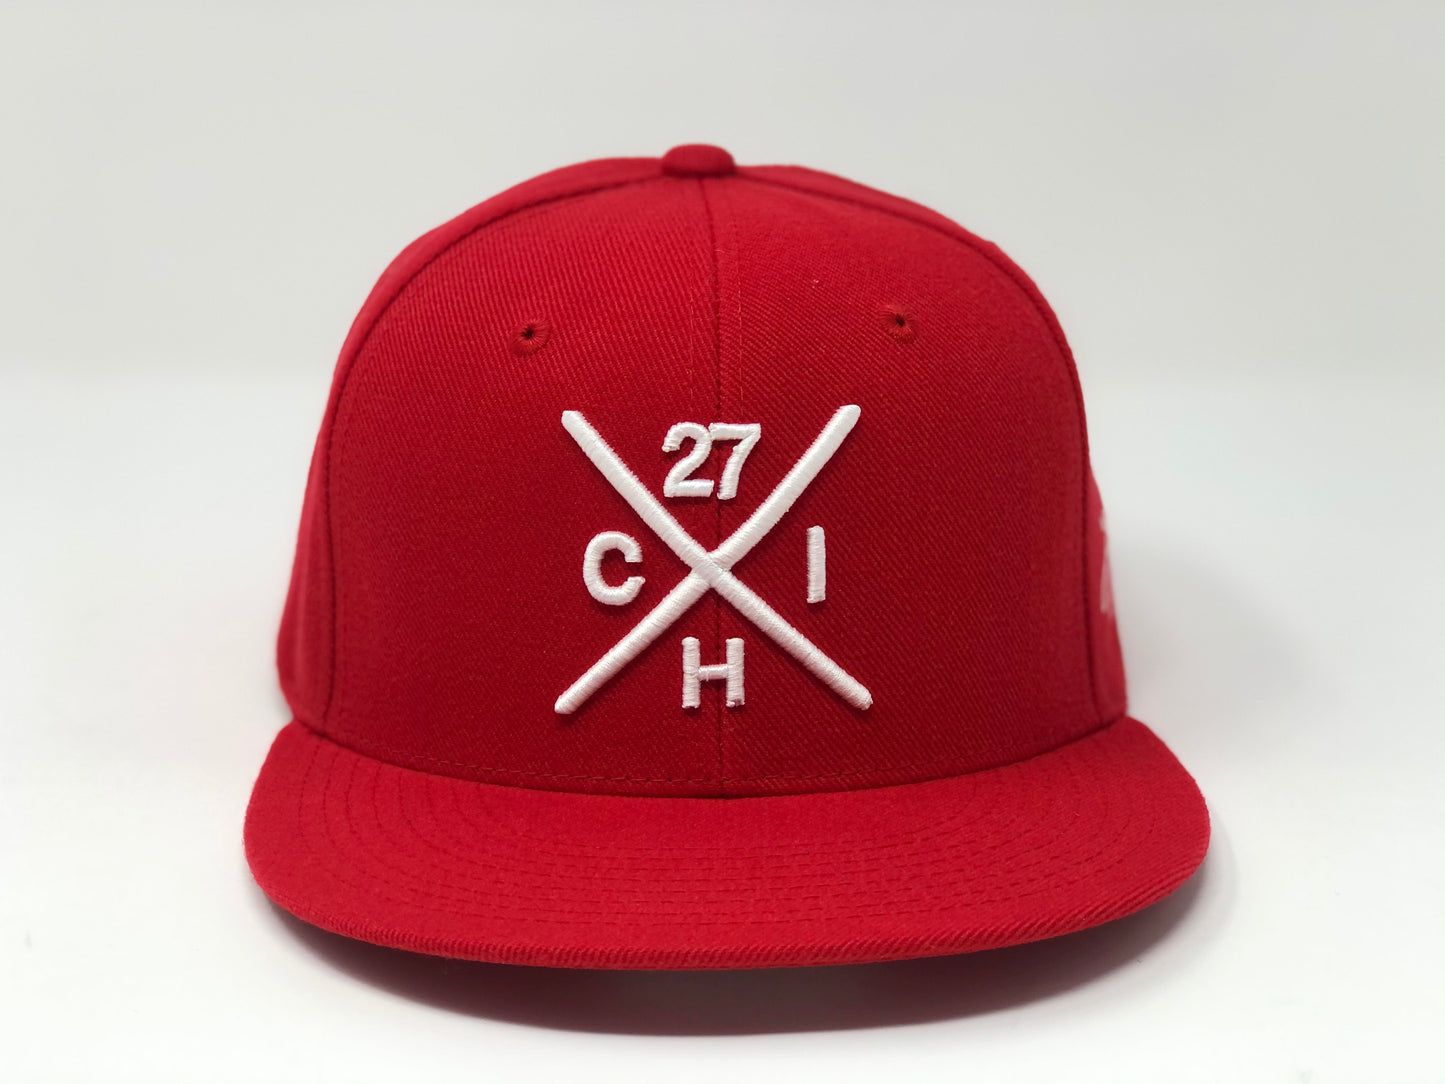 Lucas Giolito Compass Hat - Red Snapback